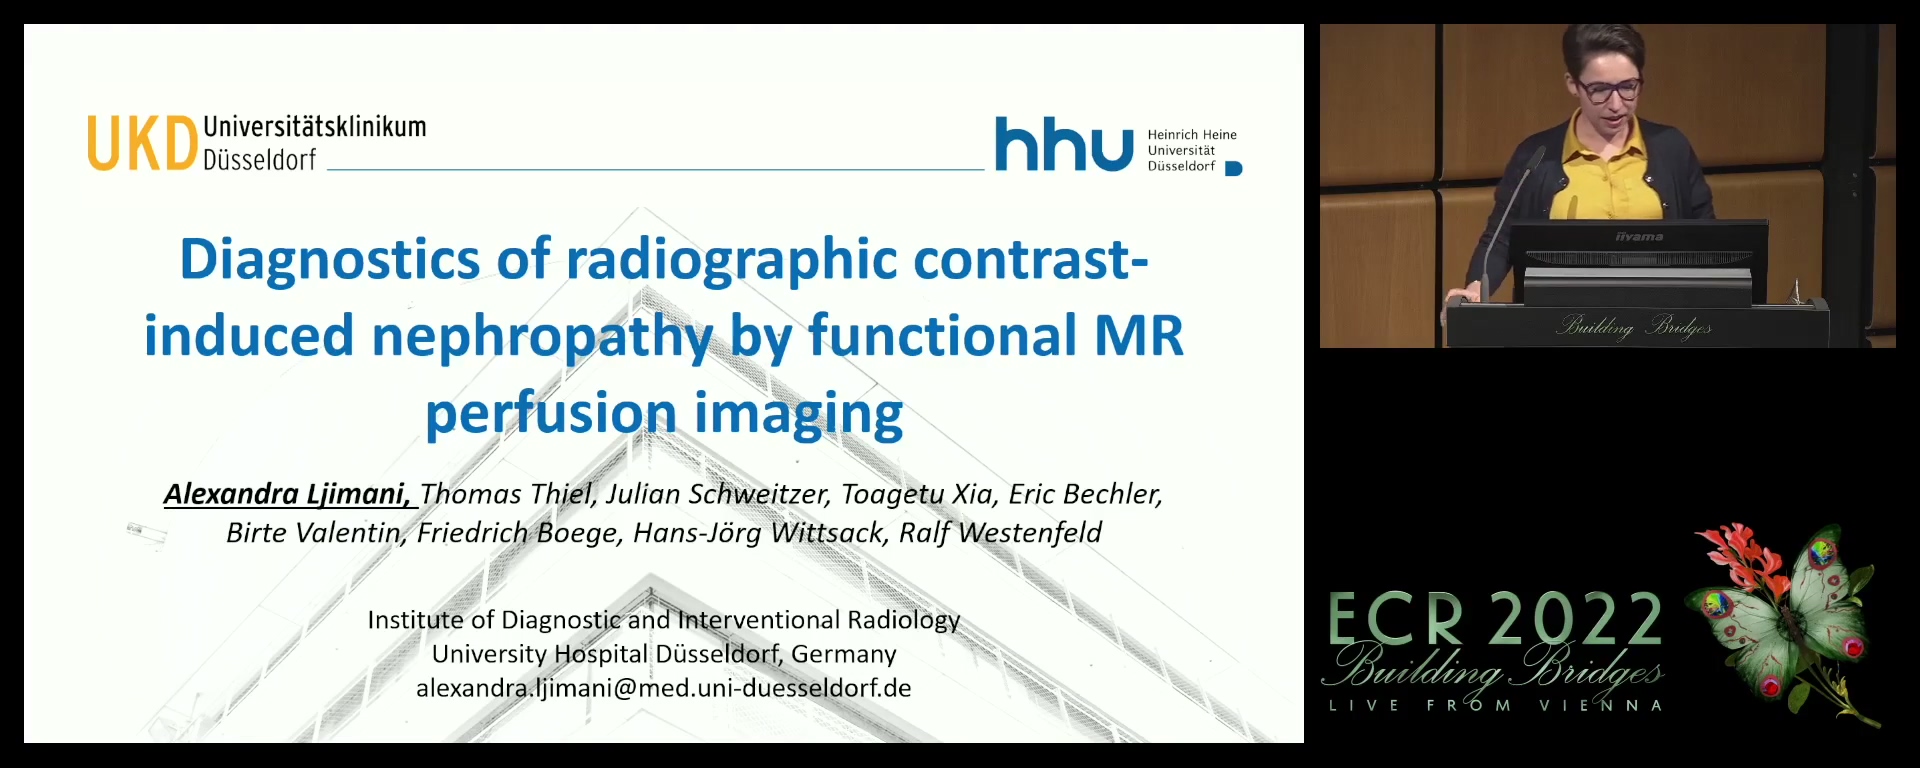 Diagnostics of radiographic contrast-induced nephropathy by functional renal MR perfusion imaging - Alexandra Ljimani, Dusseldorf / DE